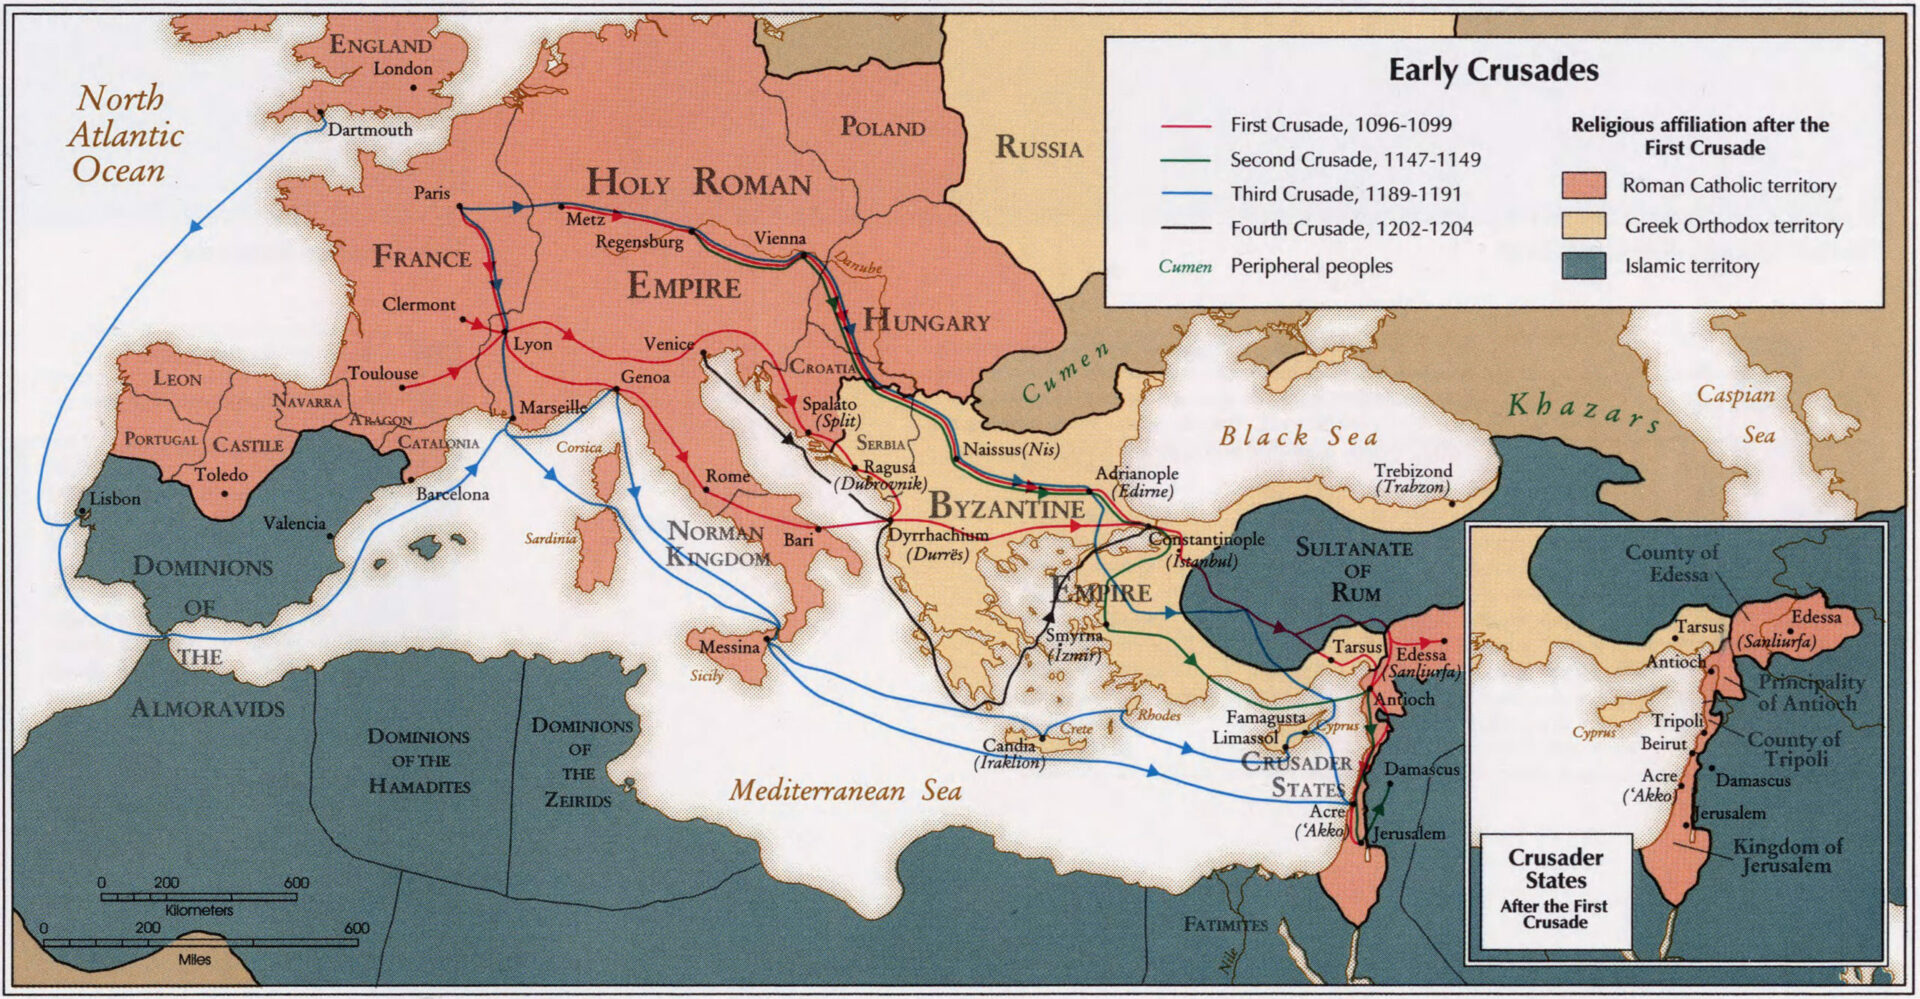 byzantium after 1261 the late middle ages in eastern europe